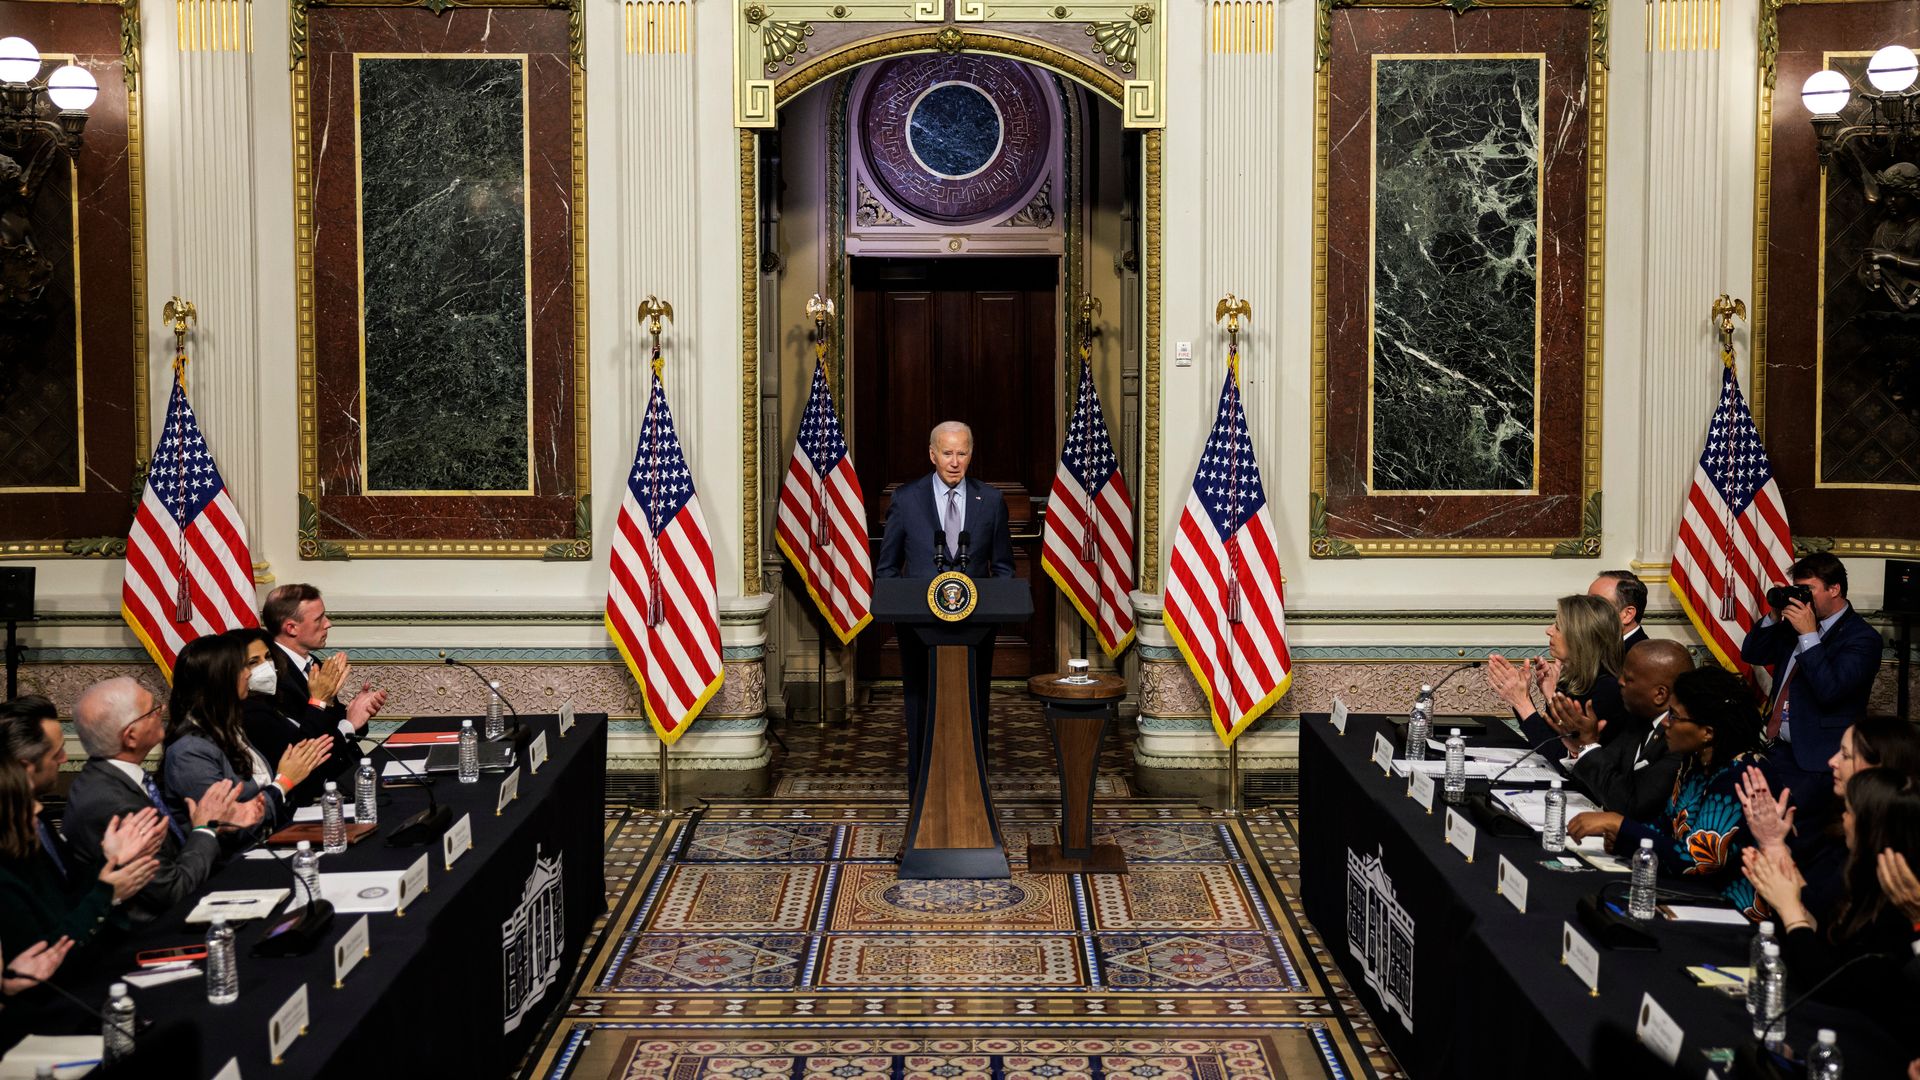 President Biden, center speaks during a roundtable discussion with Jewish community leaders in the Indian Treaty Room of the White House. Photo: Samuel Corum/Sipa/Bloomberg via Getty Images